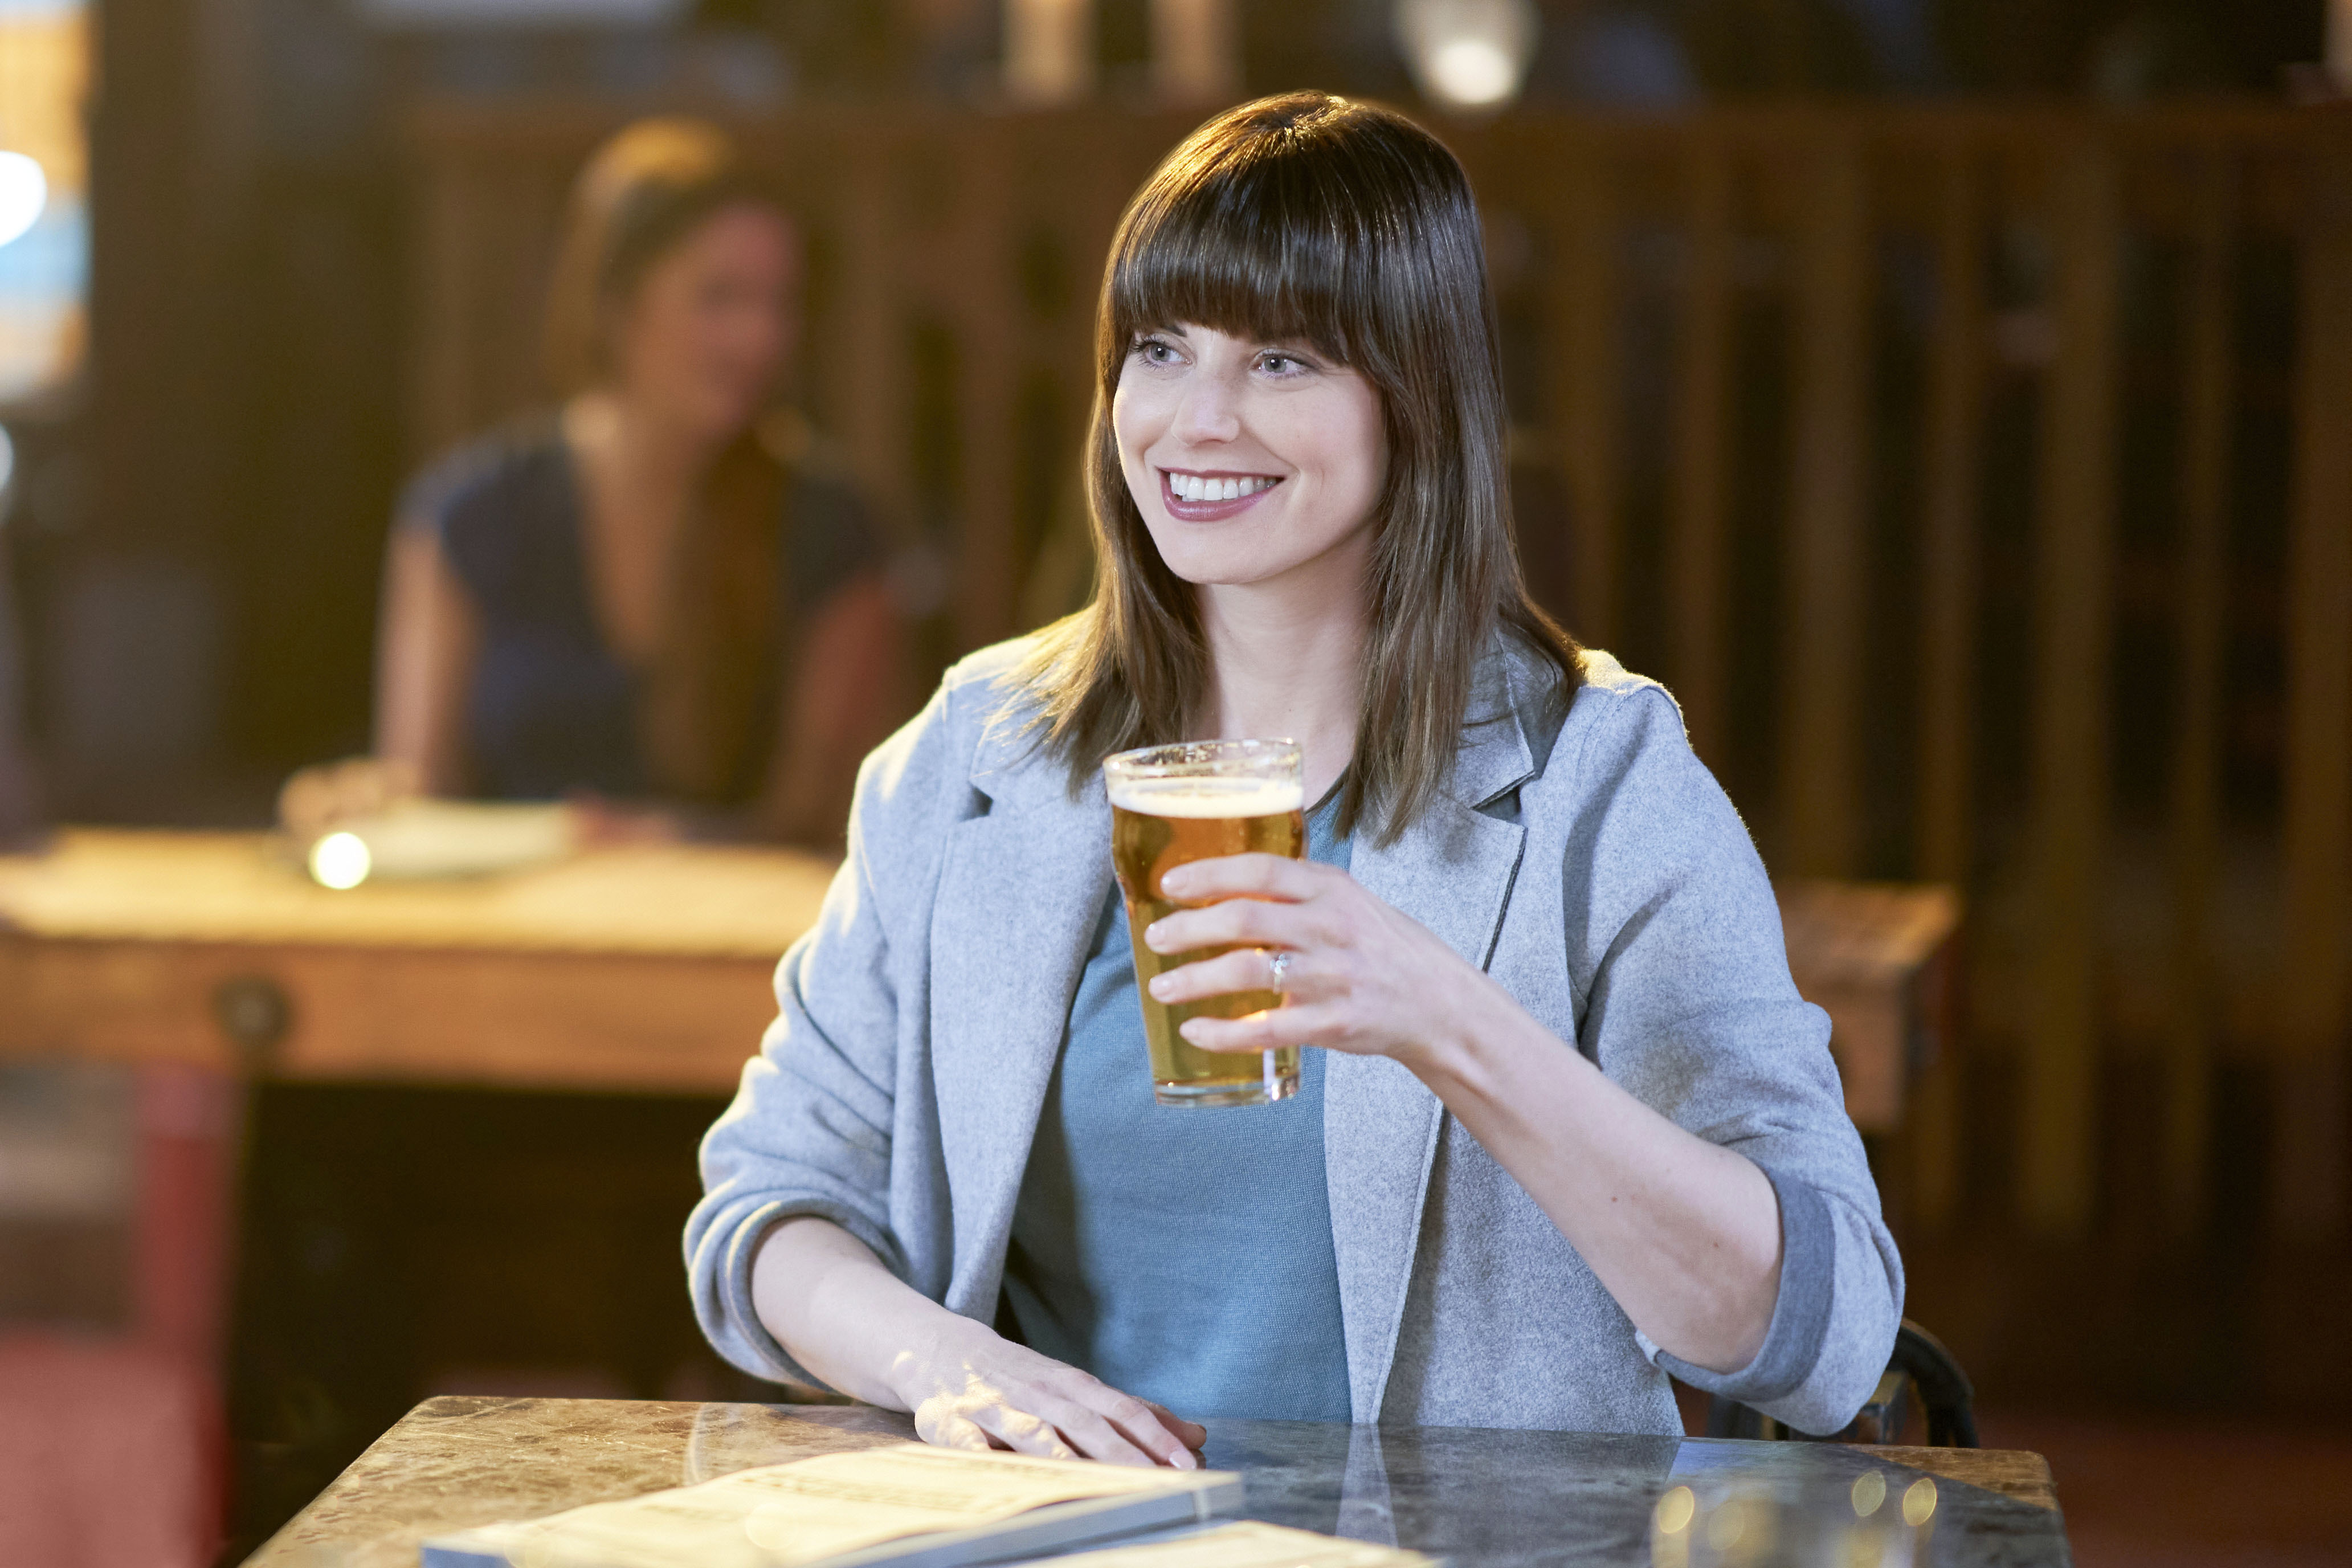 Meghan Ory as Abby, holding a beer, in 'Chesapeake Shores' Season 5